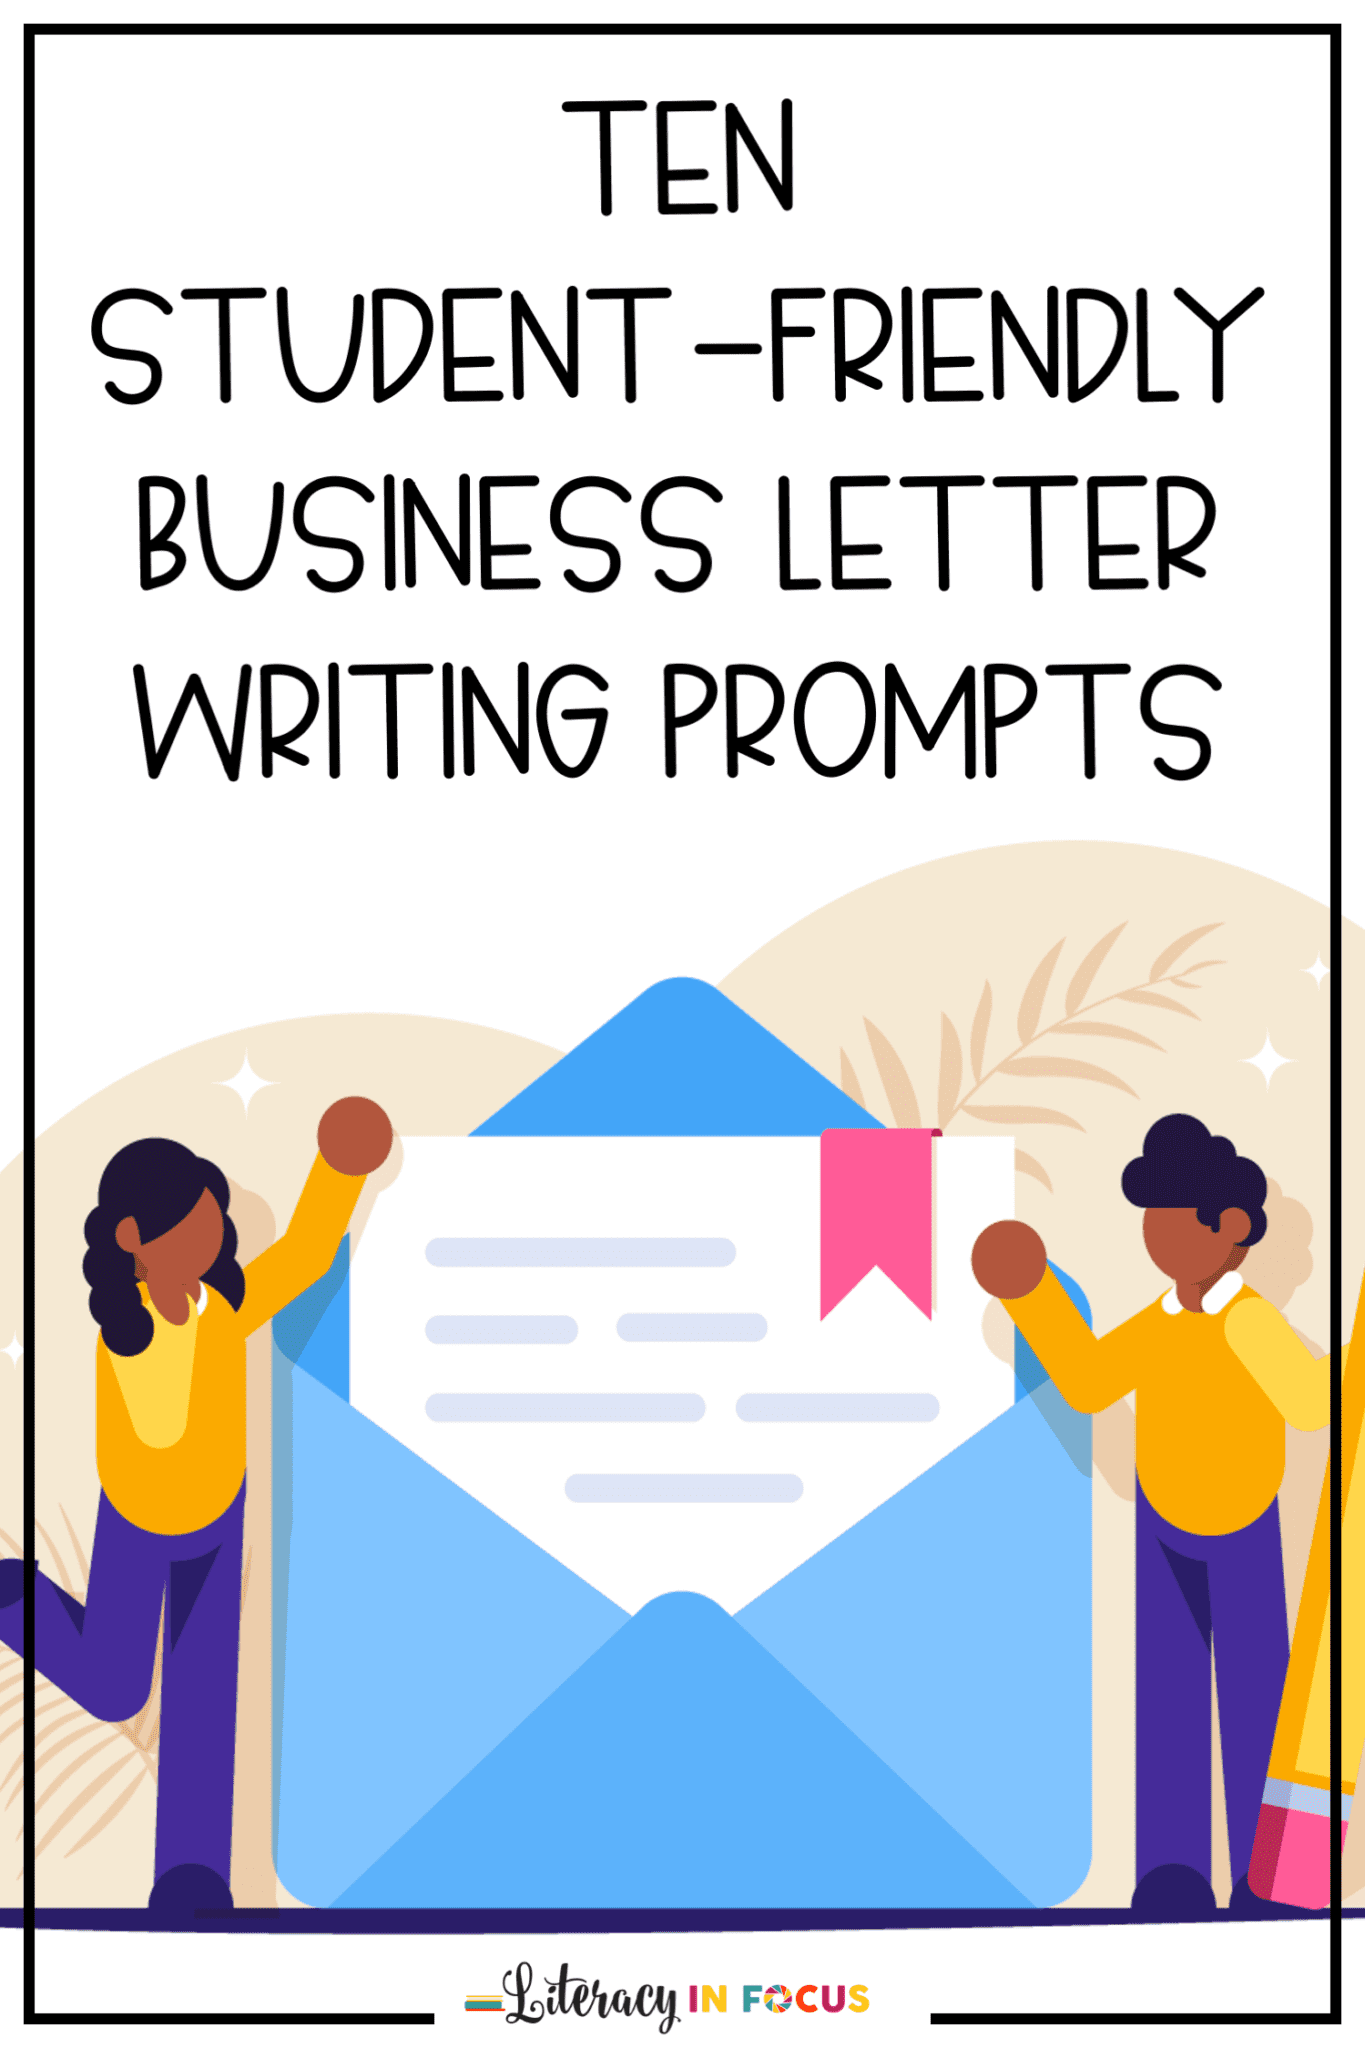 10 Student-Friendly Business Letter Writing Prompts